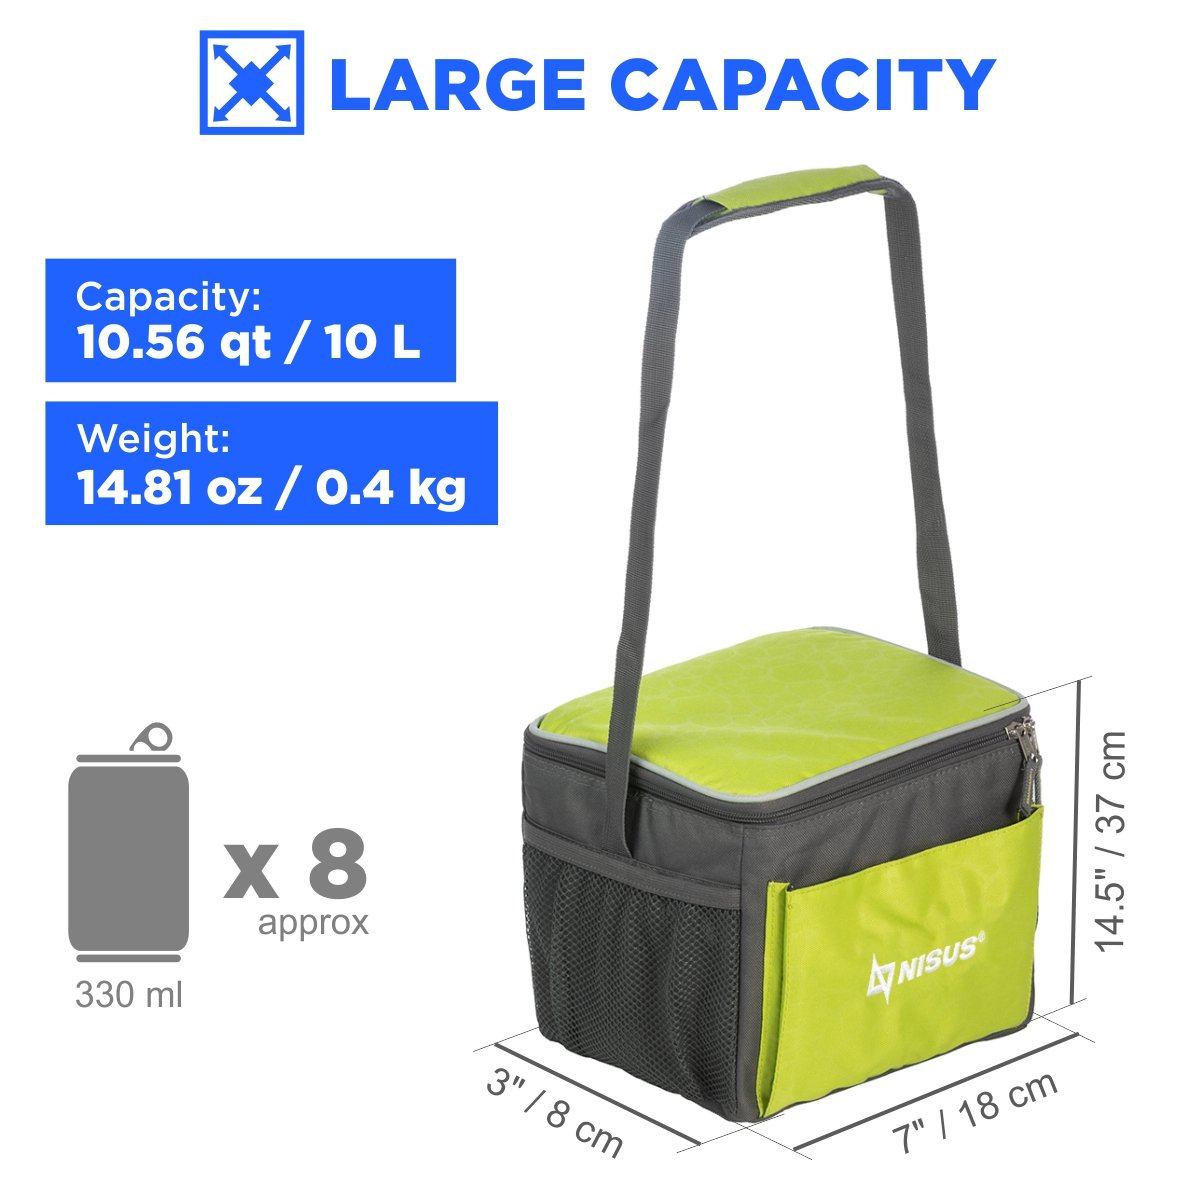 11 qt Beach Soft Sided Cooler Bag for 8 cans weighs less than 15 oz, it is 7 inches long, 3 inches wide and 14.5 inches high